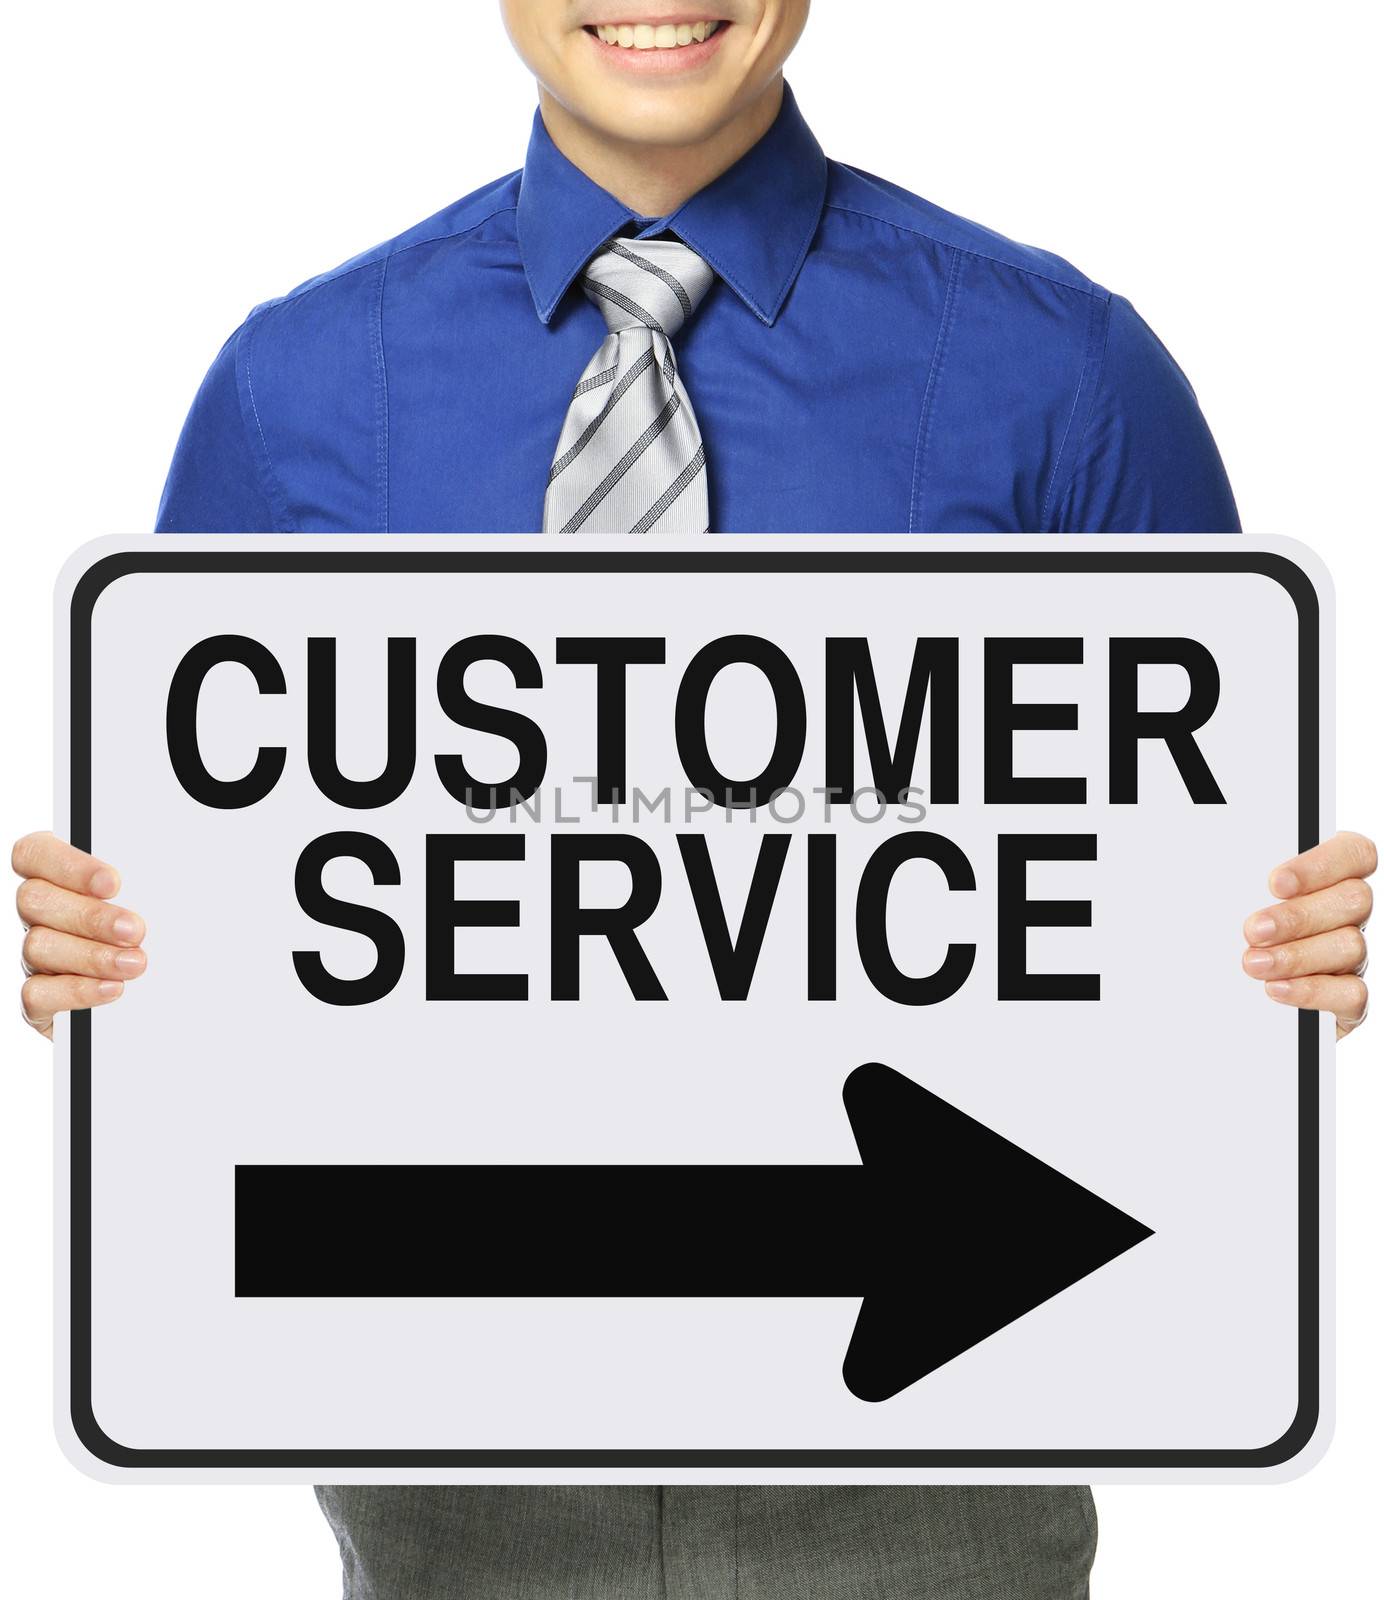 Customer Service This Way by rnl